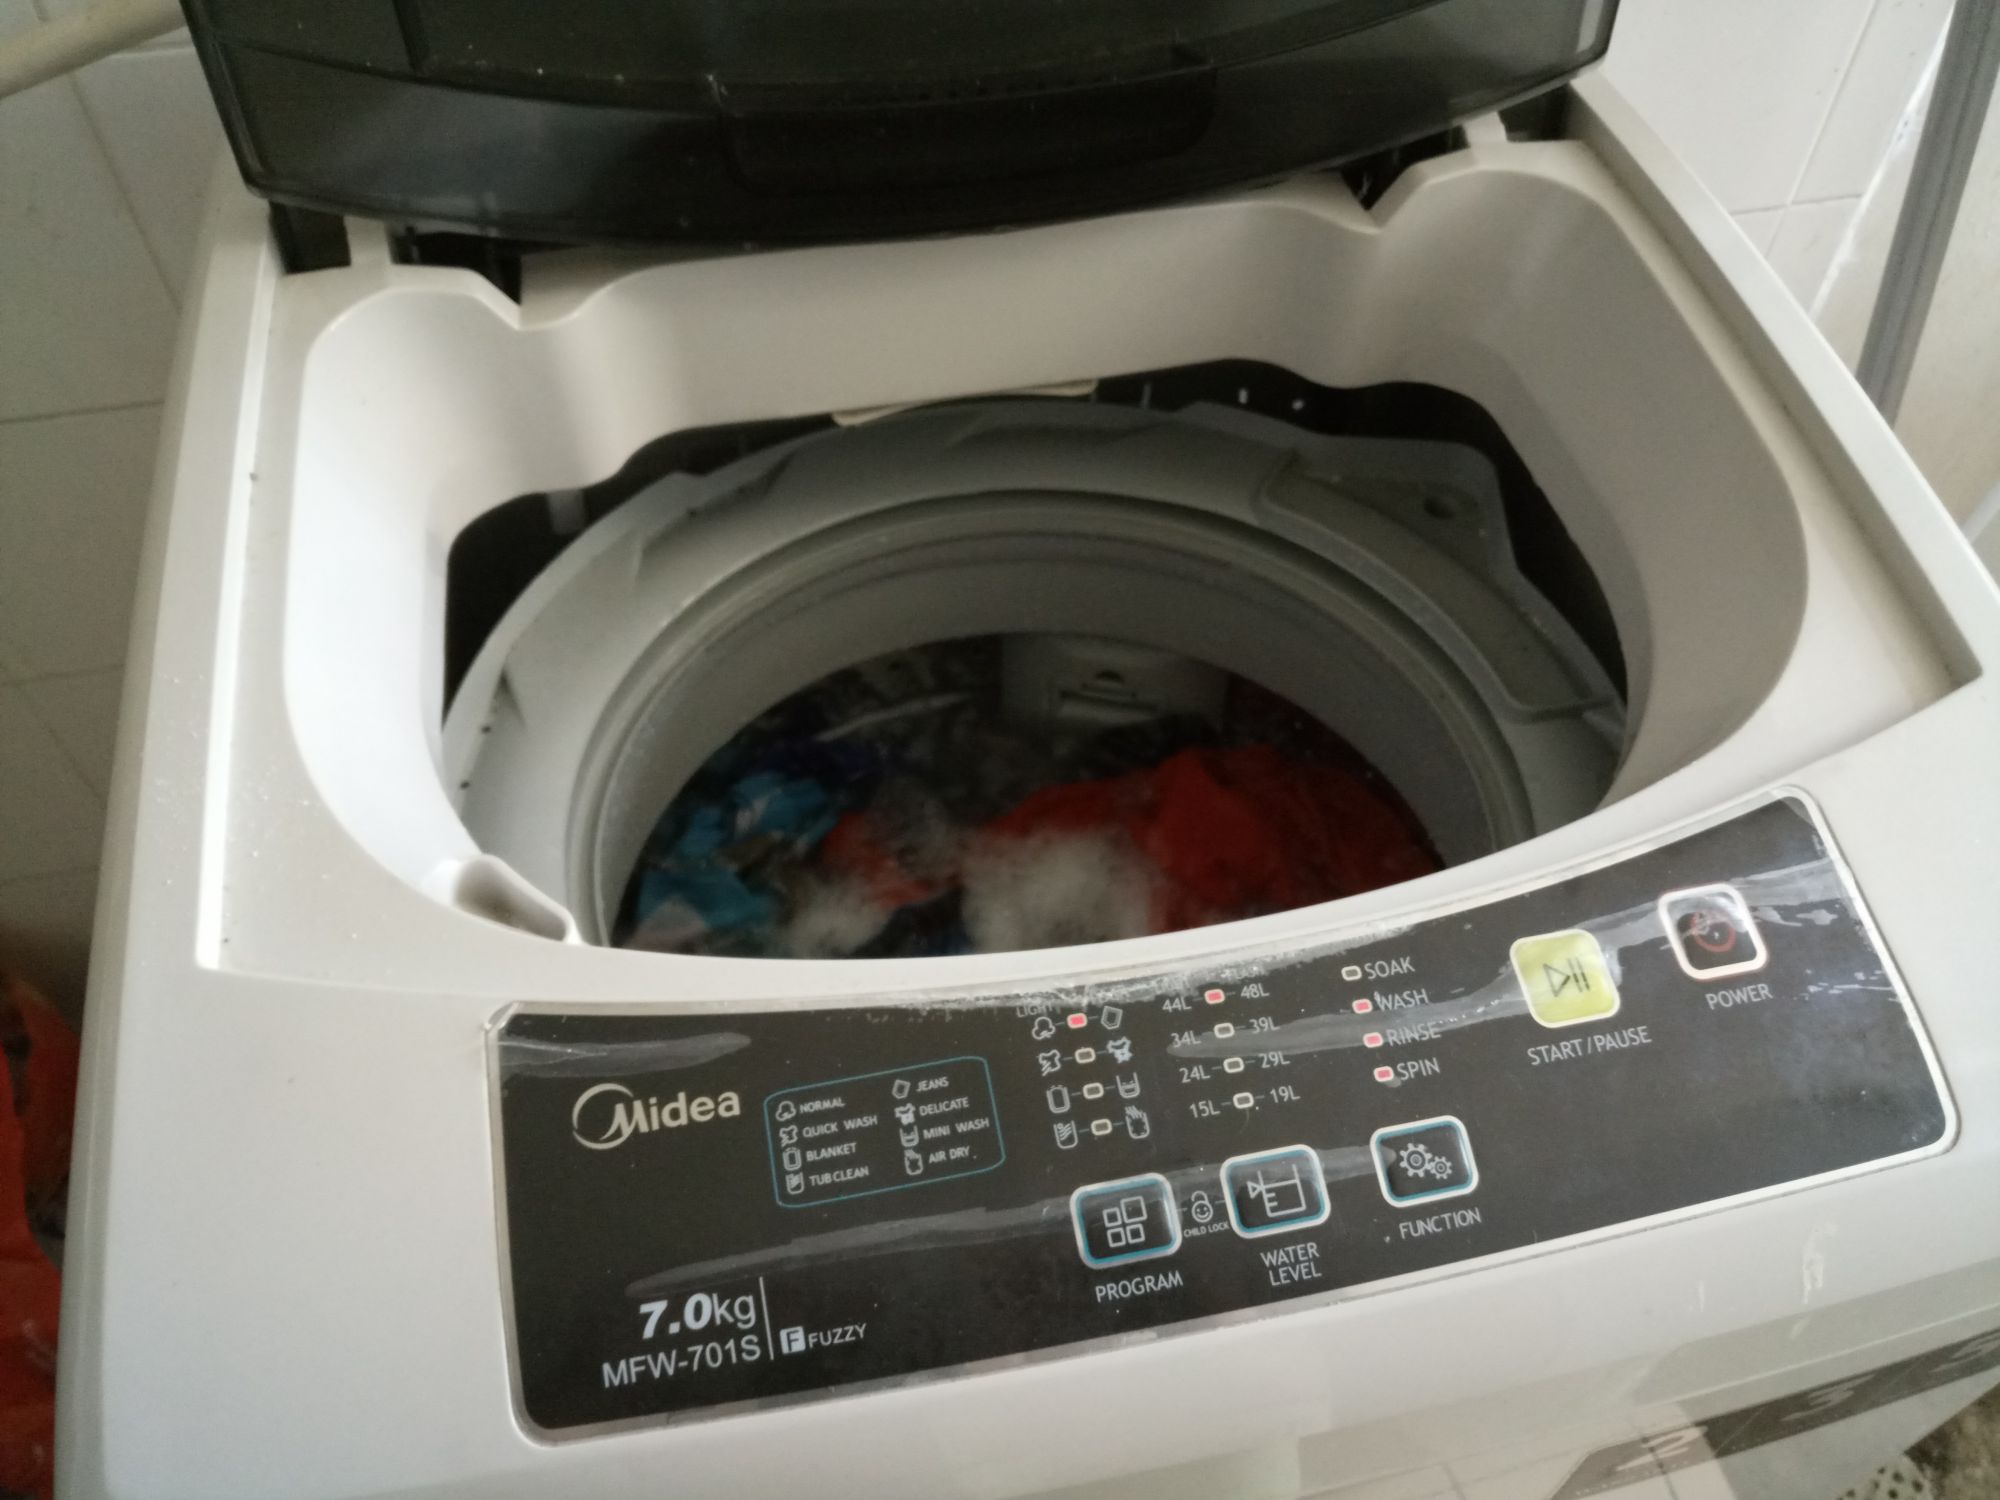 How To Reset Midea Washing Machine Top Loader